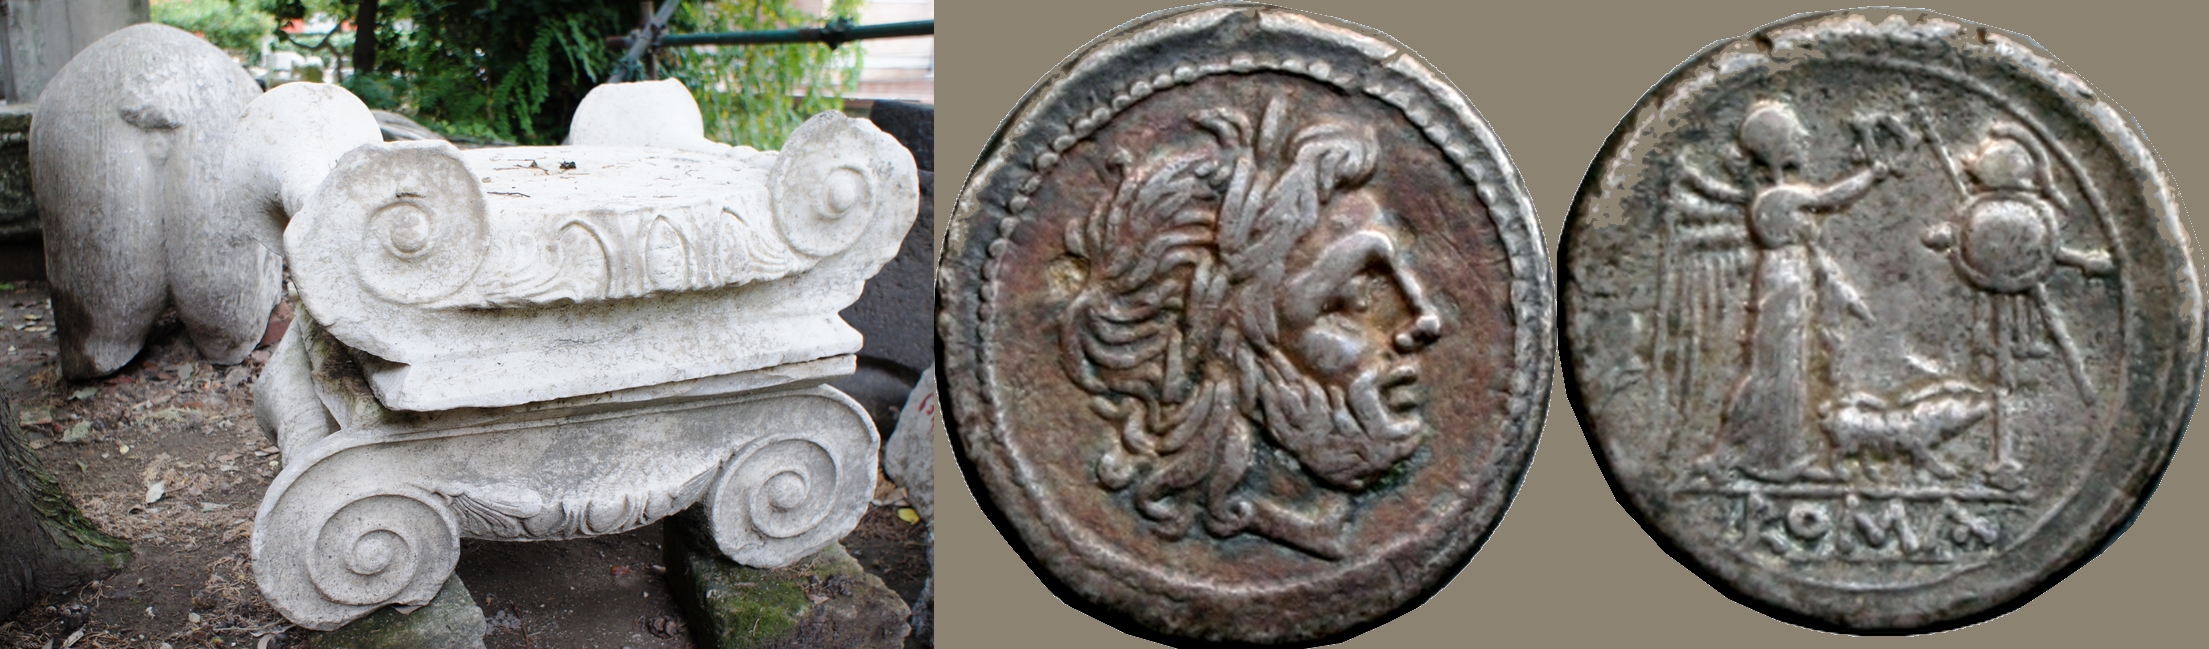 121/1 coin of 210BC with Jupiter, Victory, Trophy and Pig. beside Ionic capitals and a Pig's rear-end, discarded marble fragments at Puteoli amphitheatre